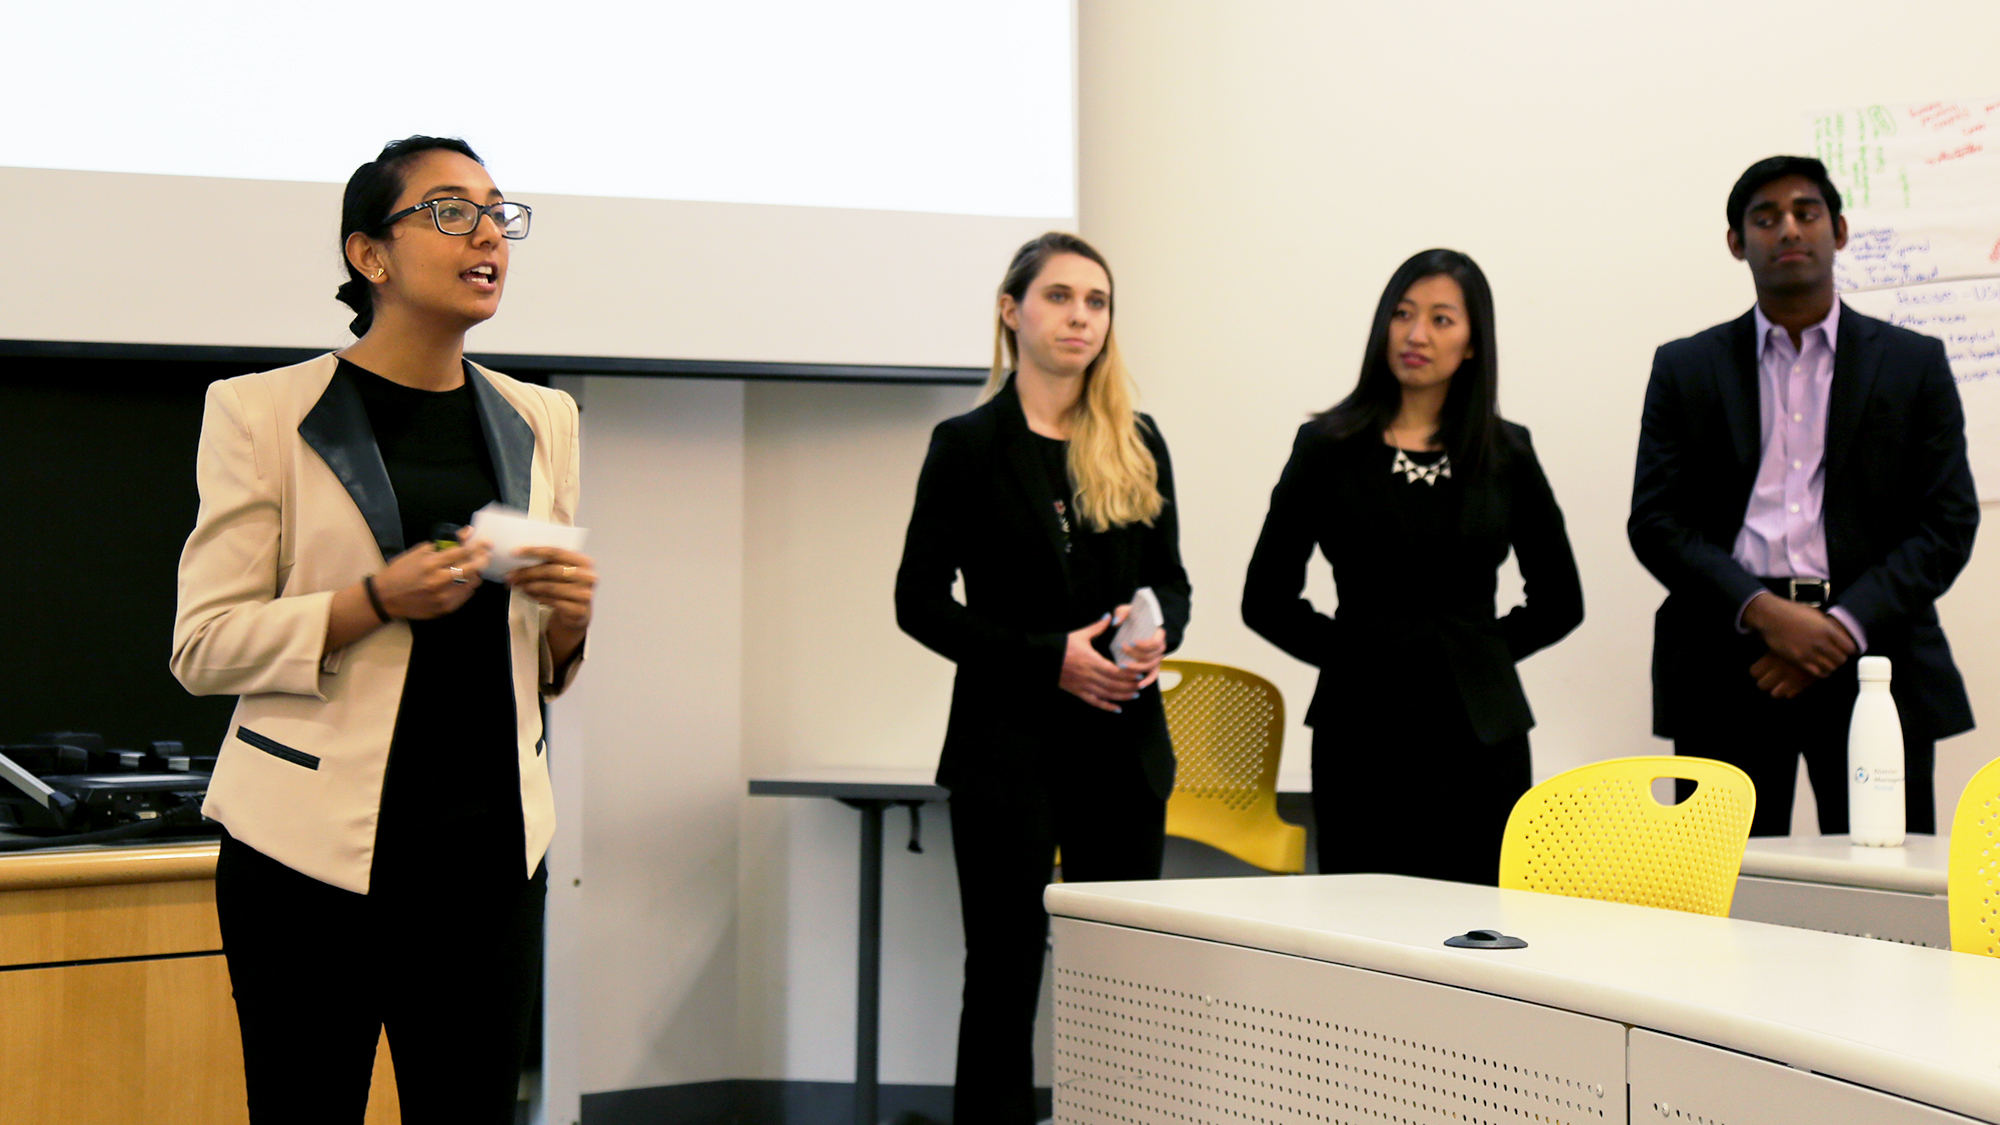 A team of Heller-Tufts MD/MBA students present on their TCP project with the Planned Parenthood League of Massachusetts